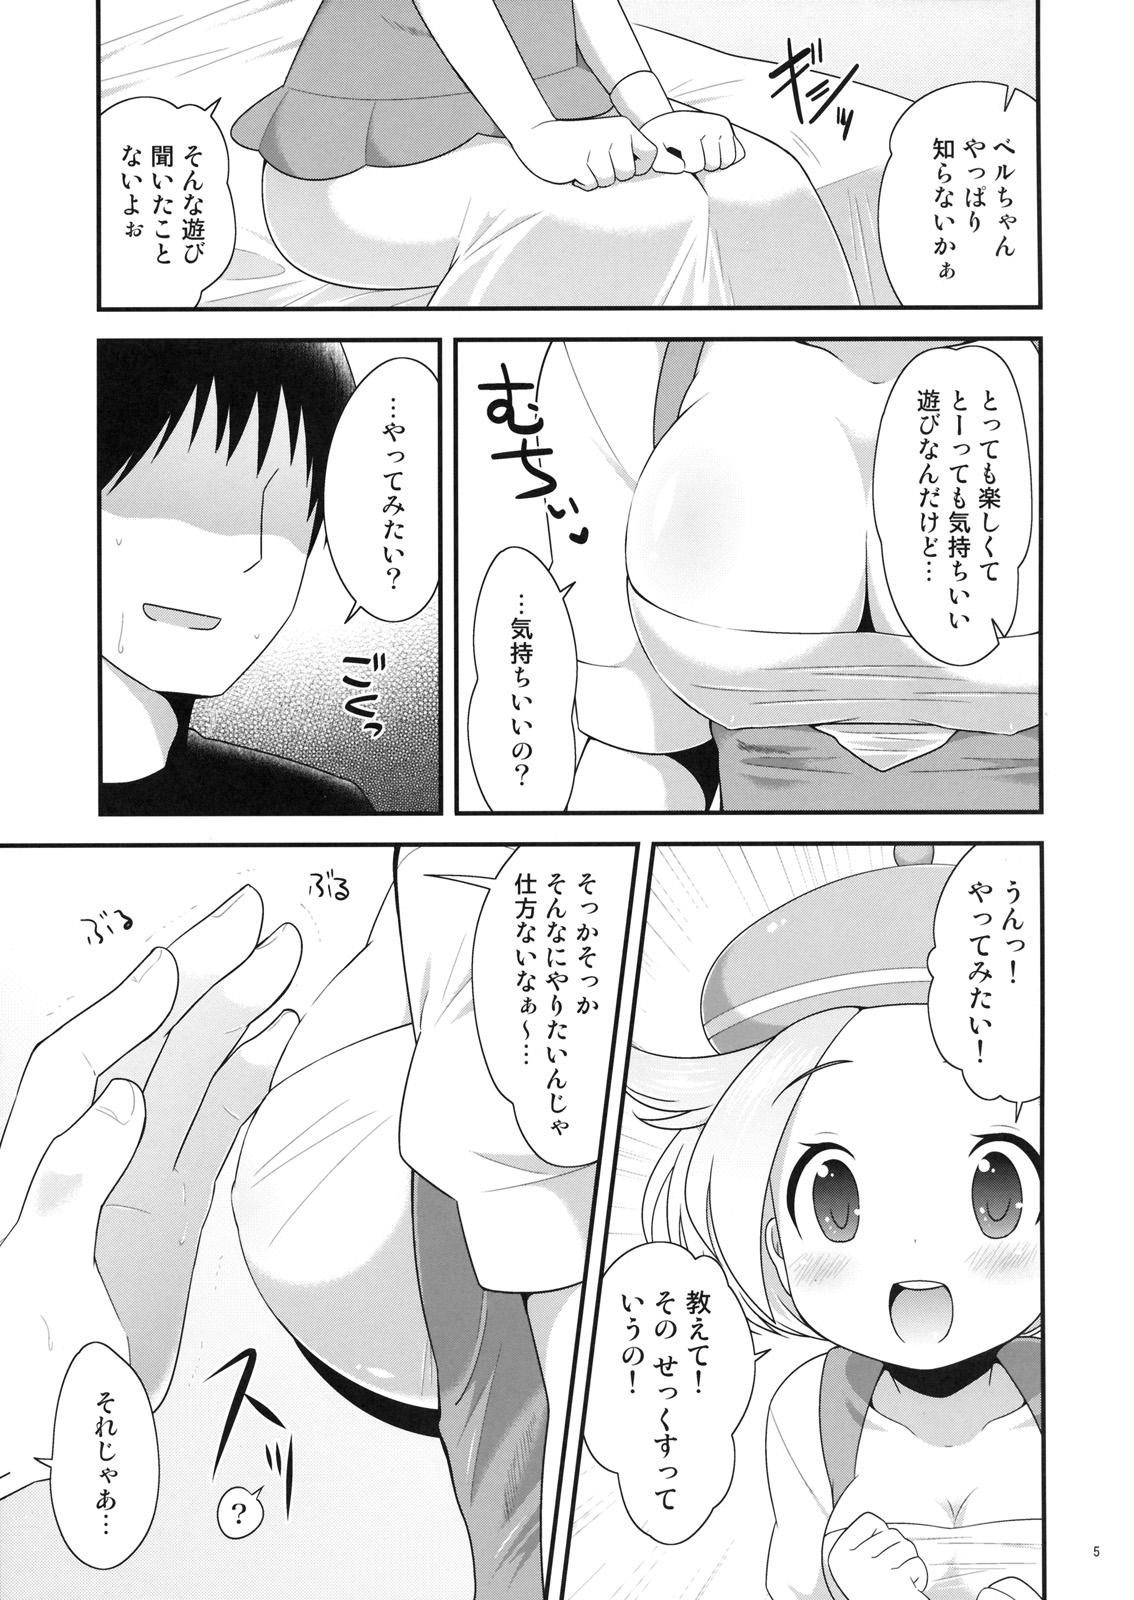 Petite Teen Bel-chan to Asobo! - Pokemon Delicia - Page 4